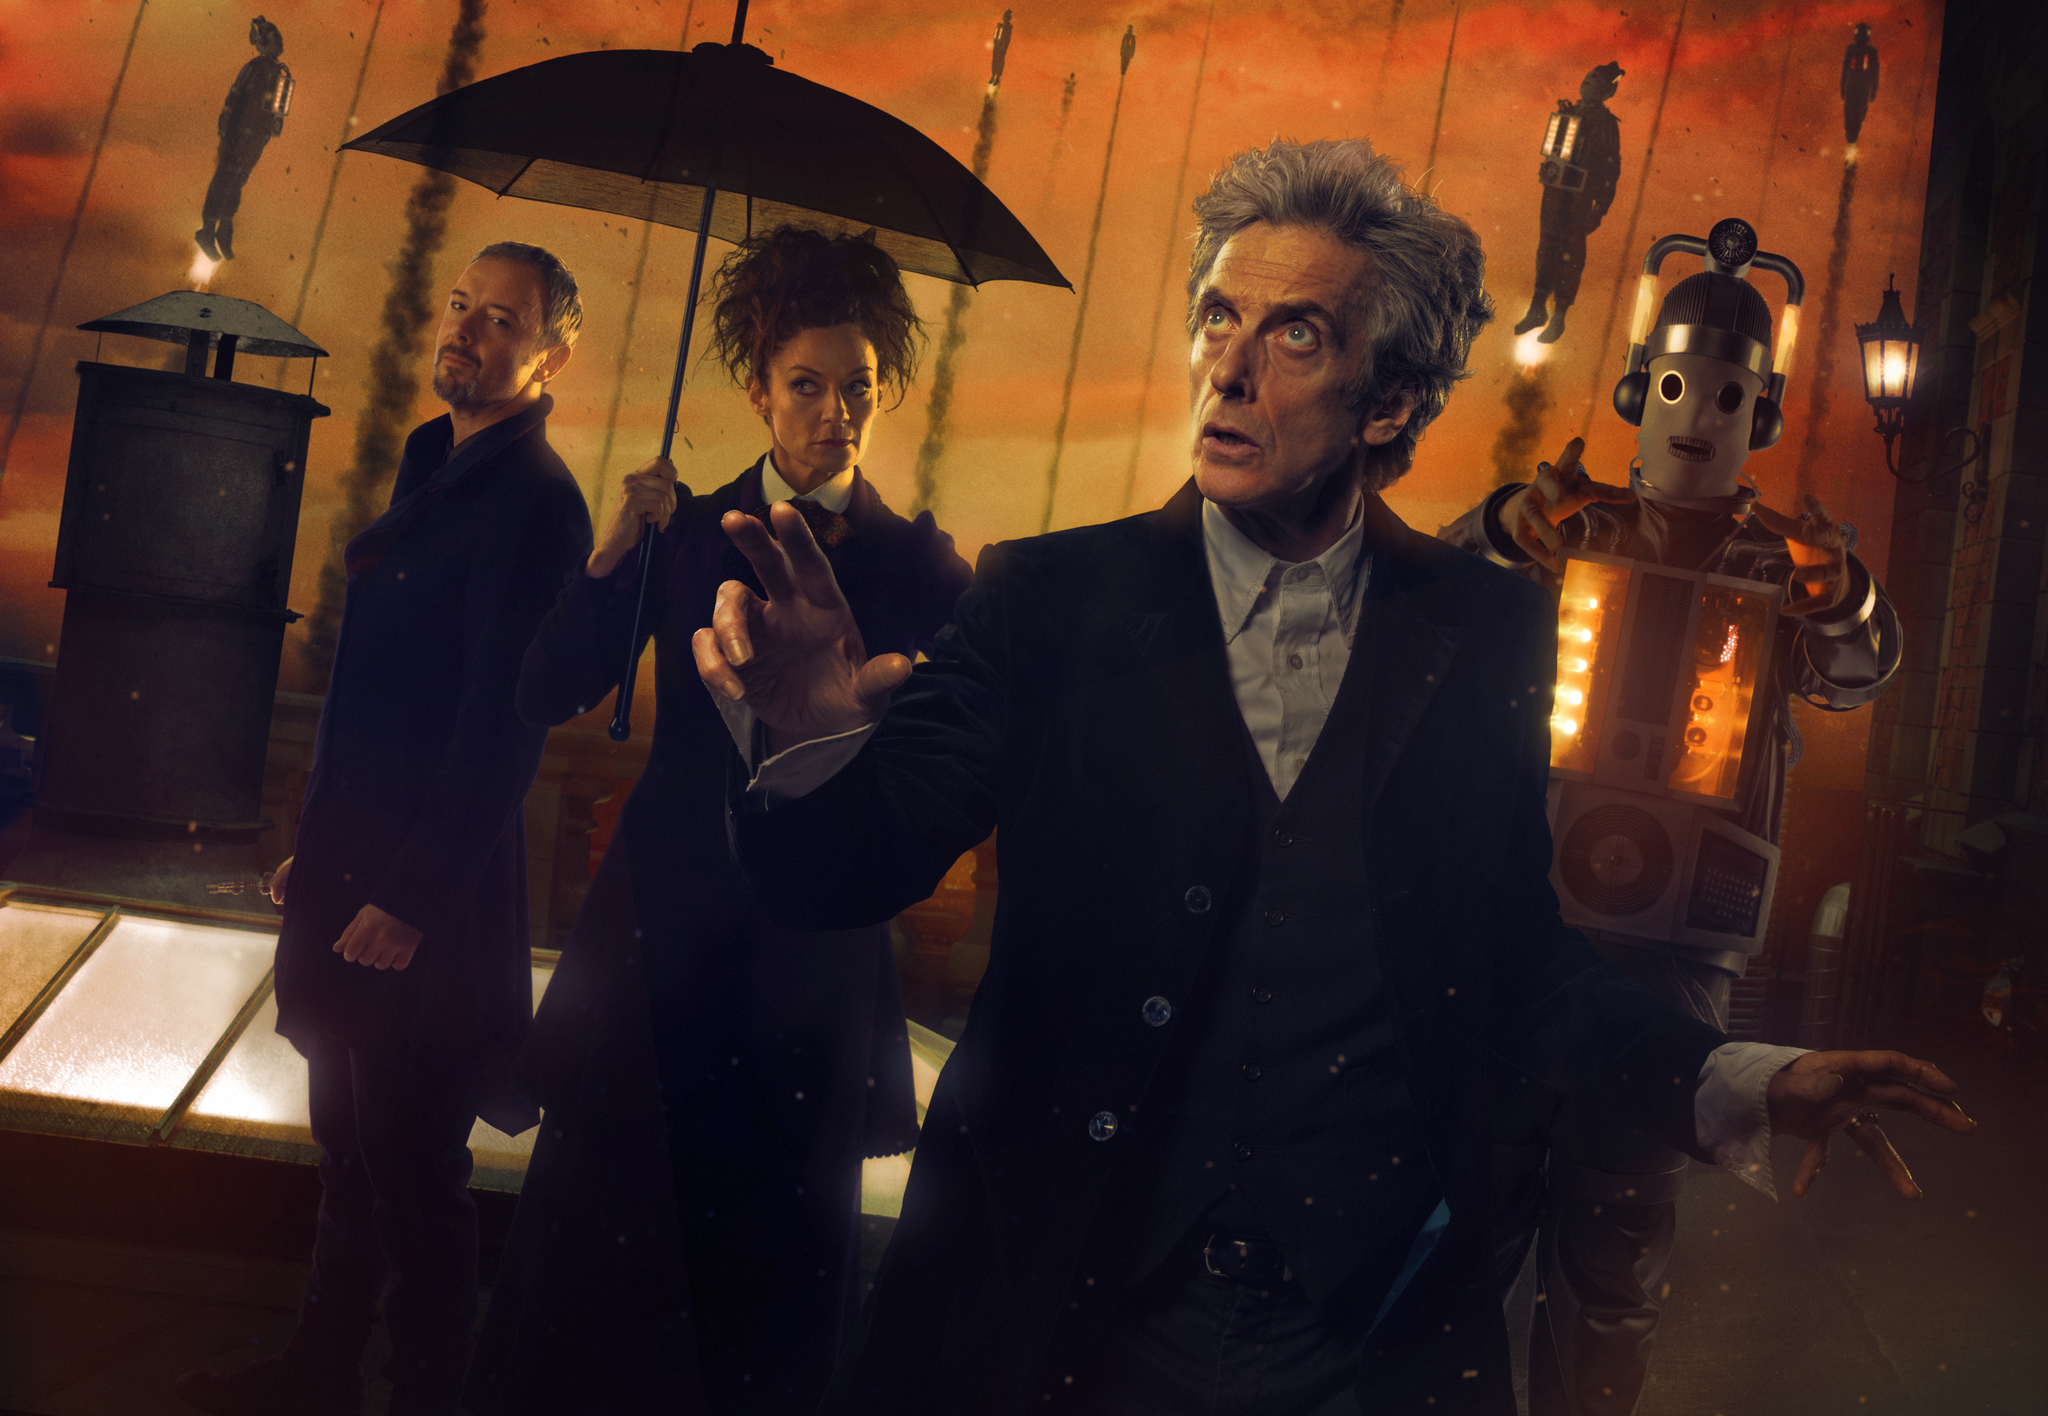 Doctor Who Season Finale: “The Doctor Falls”